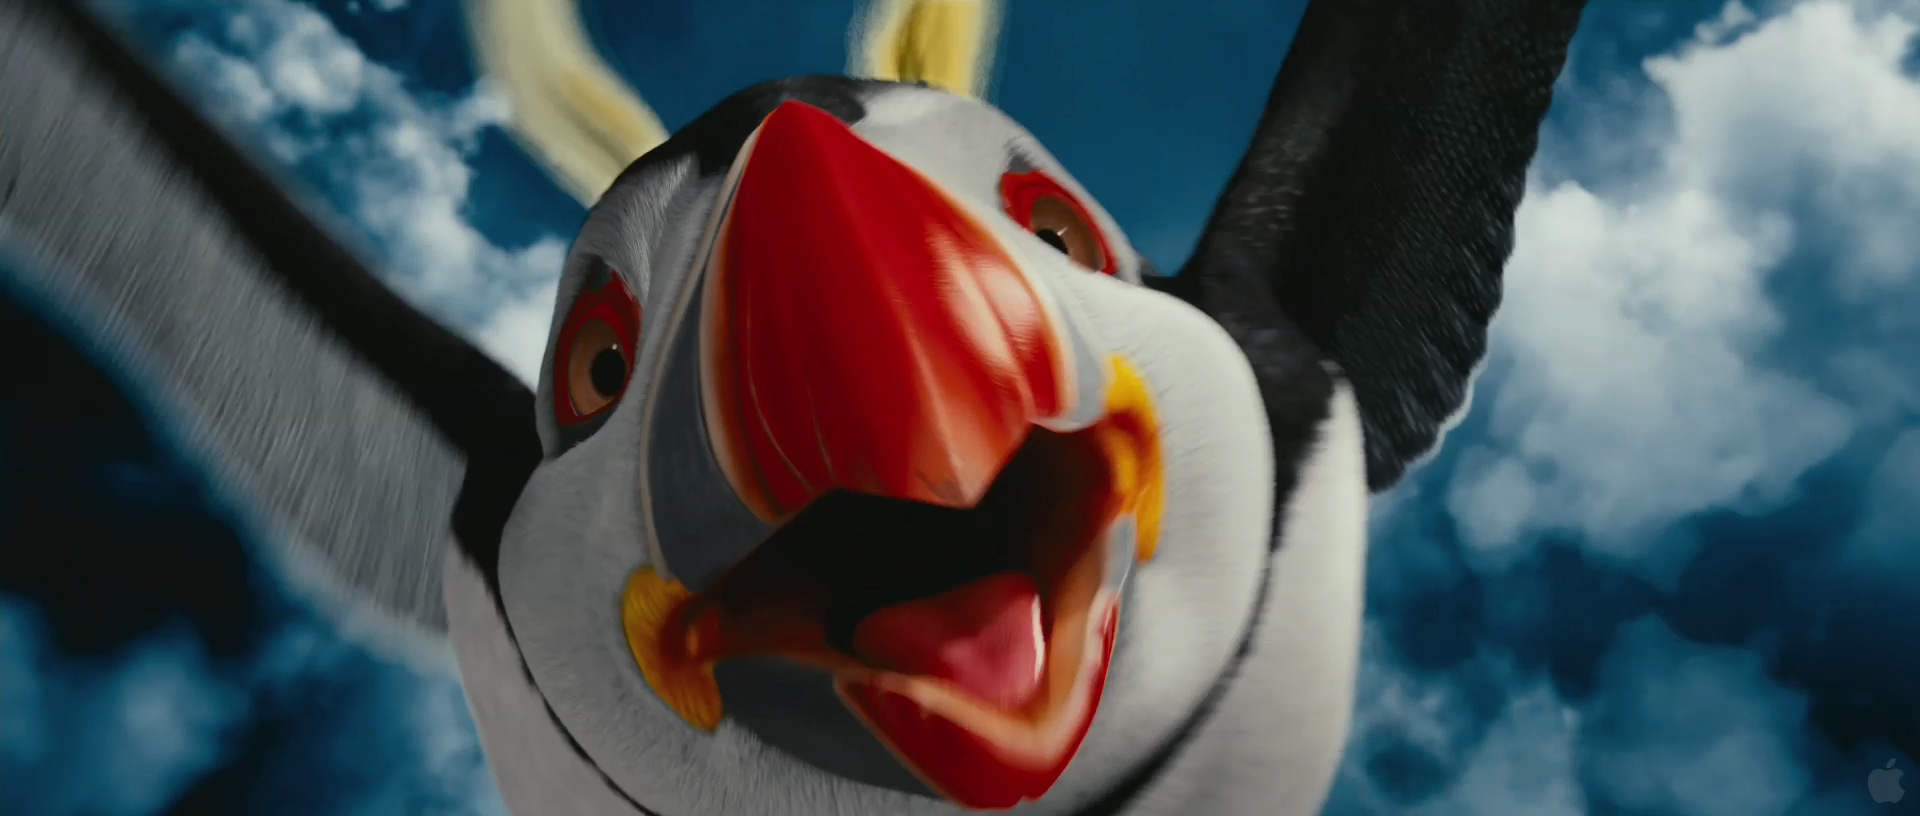 Sven the Puffin from Happy Feet Two Desktop Wallpaper